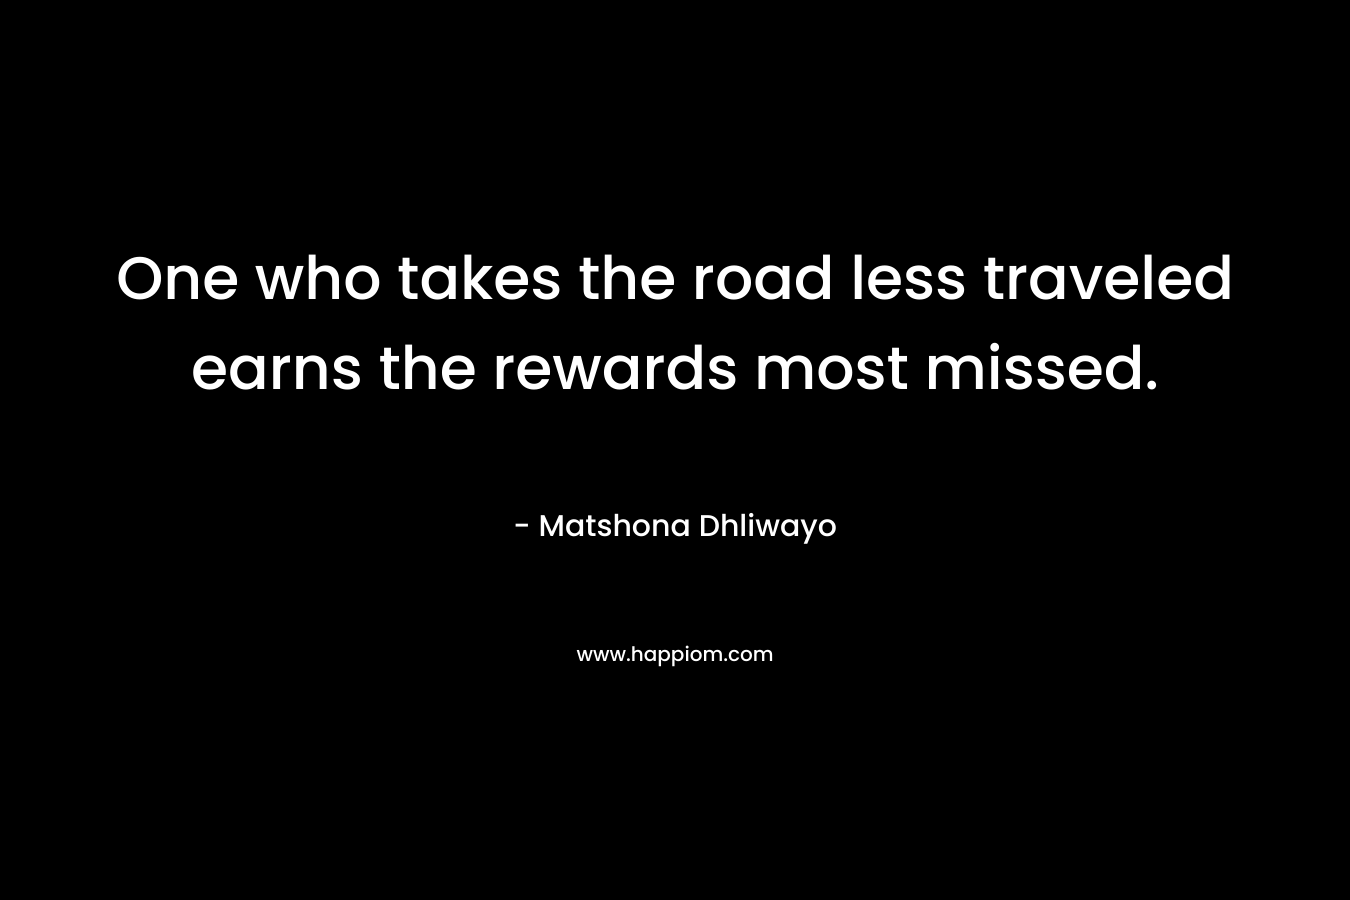 One who takes the road less traveled earns the rewards most missed.